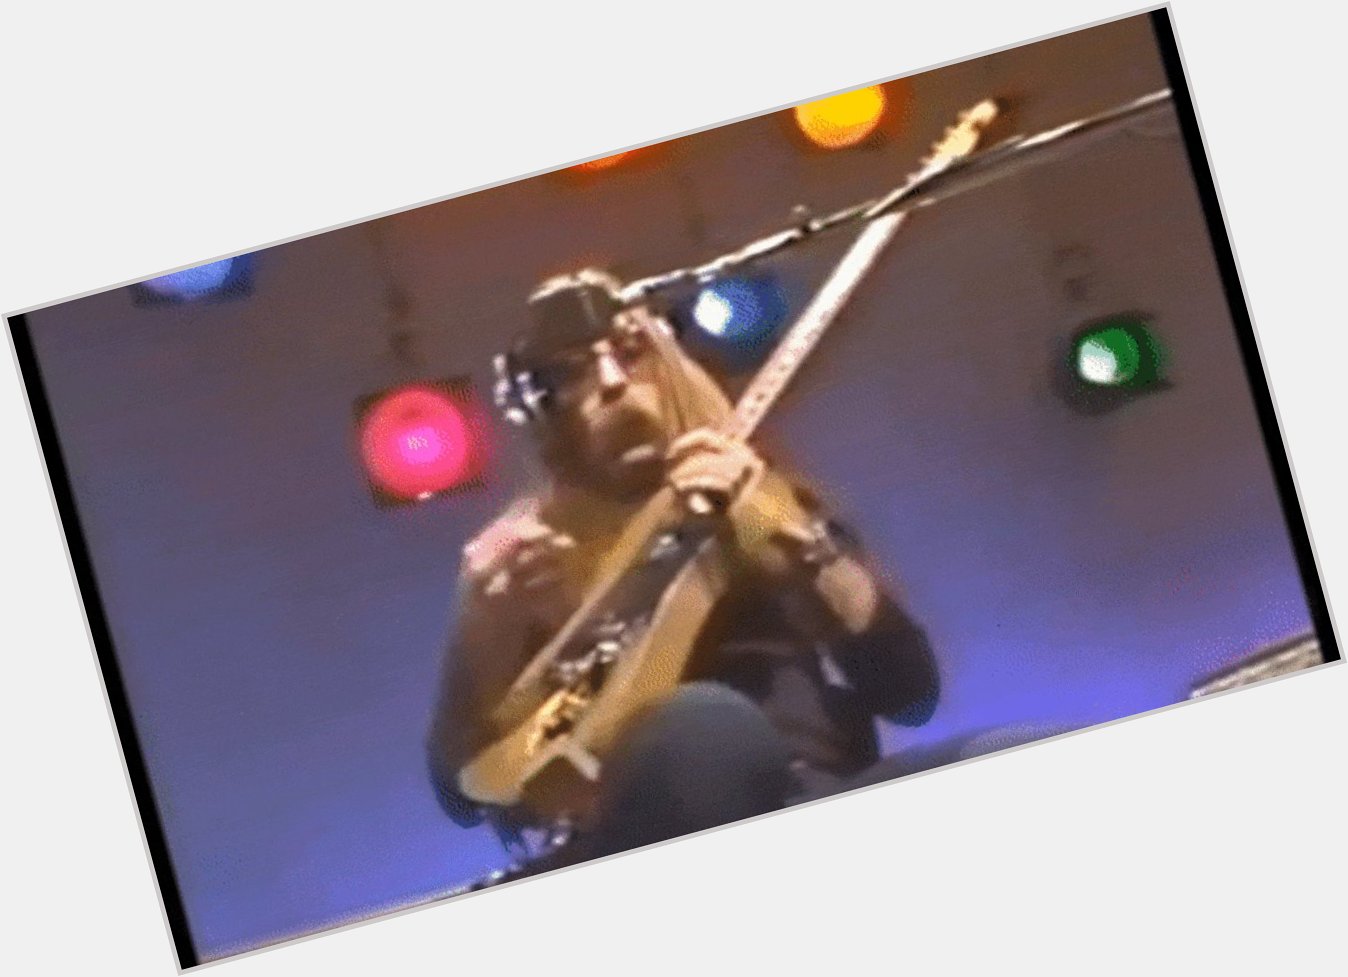 Happy Birthday Jeff Skunk Baxter: Performing Live With The Doobie Brothers In 1977  